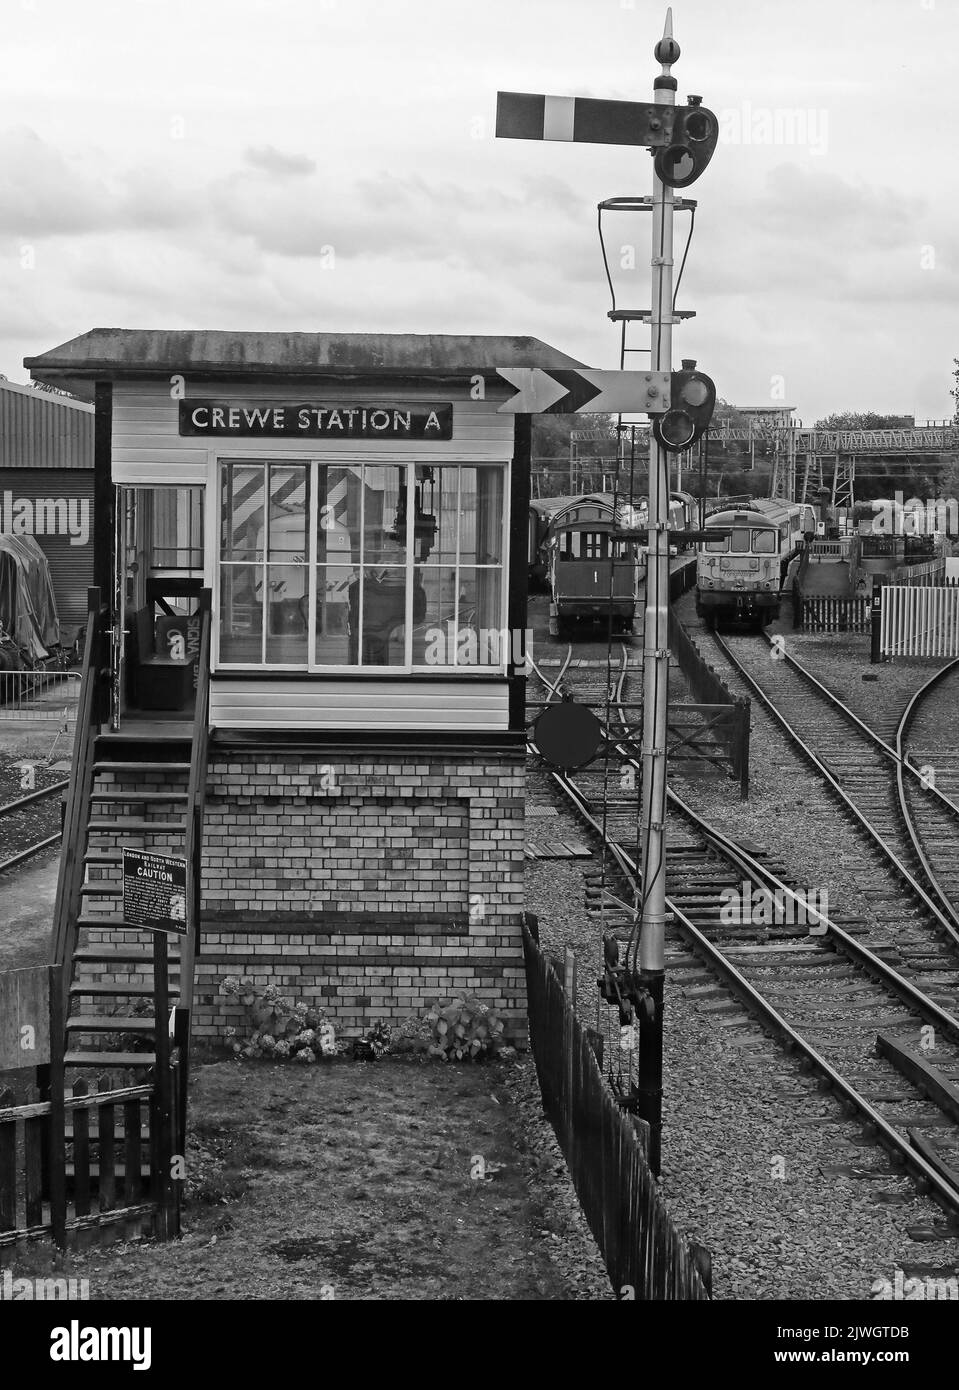 Black and White Traditional Victorian railway signalbox, Crewe Station A, at Cheshire, England, UK, CW1 2DB Stock Photo